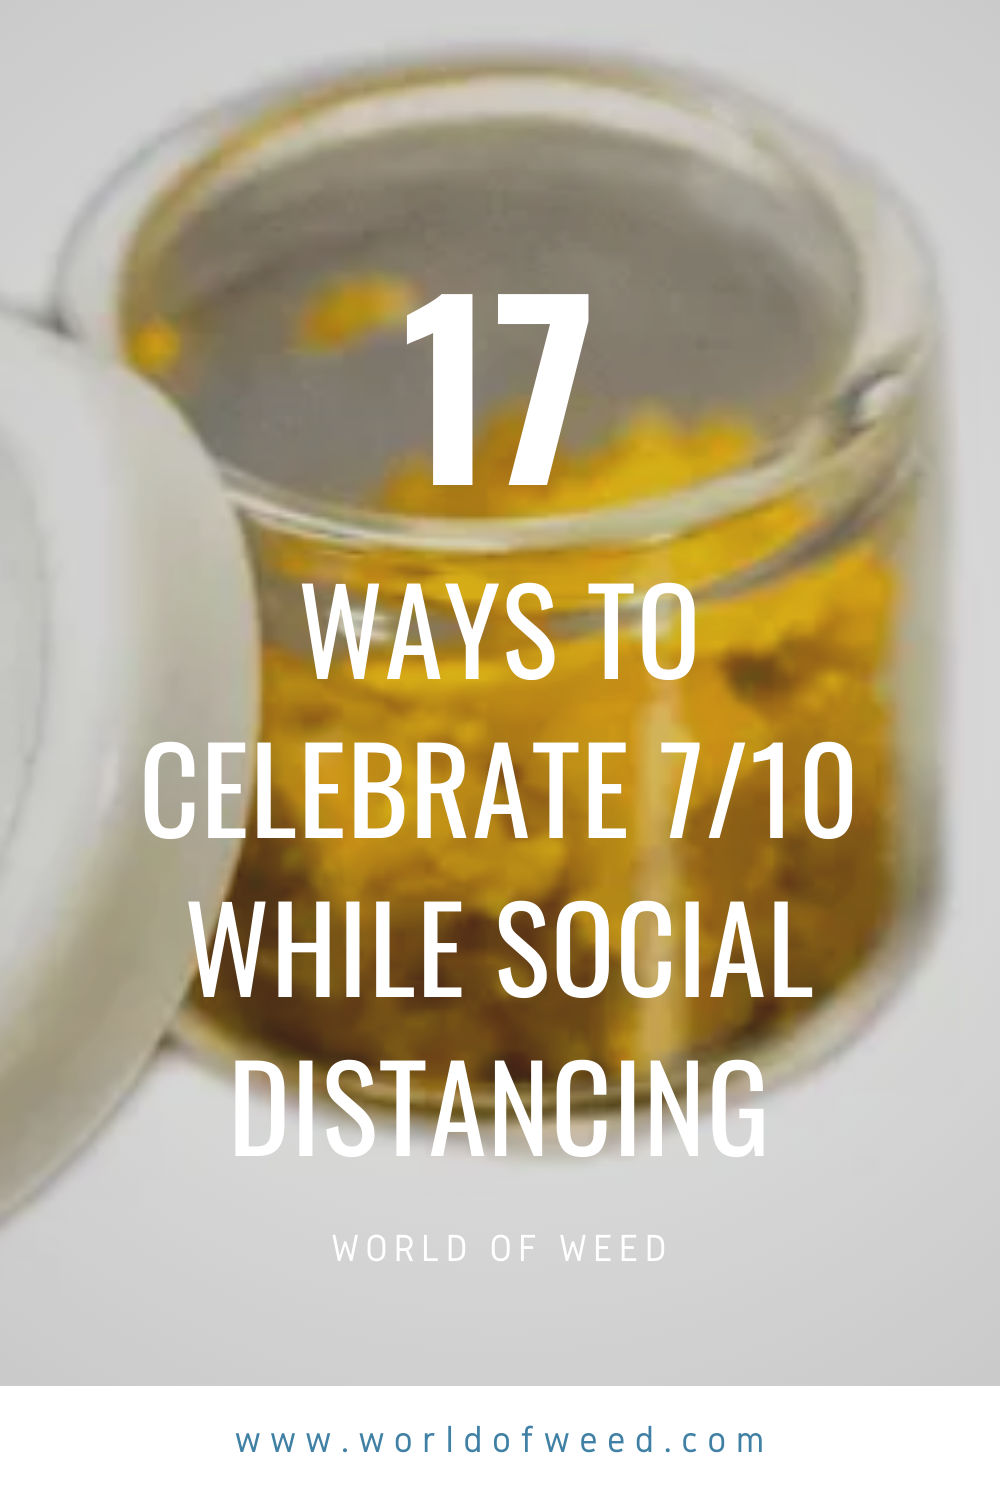 17 Ways to Celebrate National Dab Day While Social Distancing